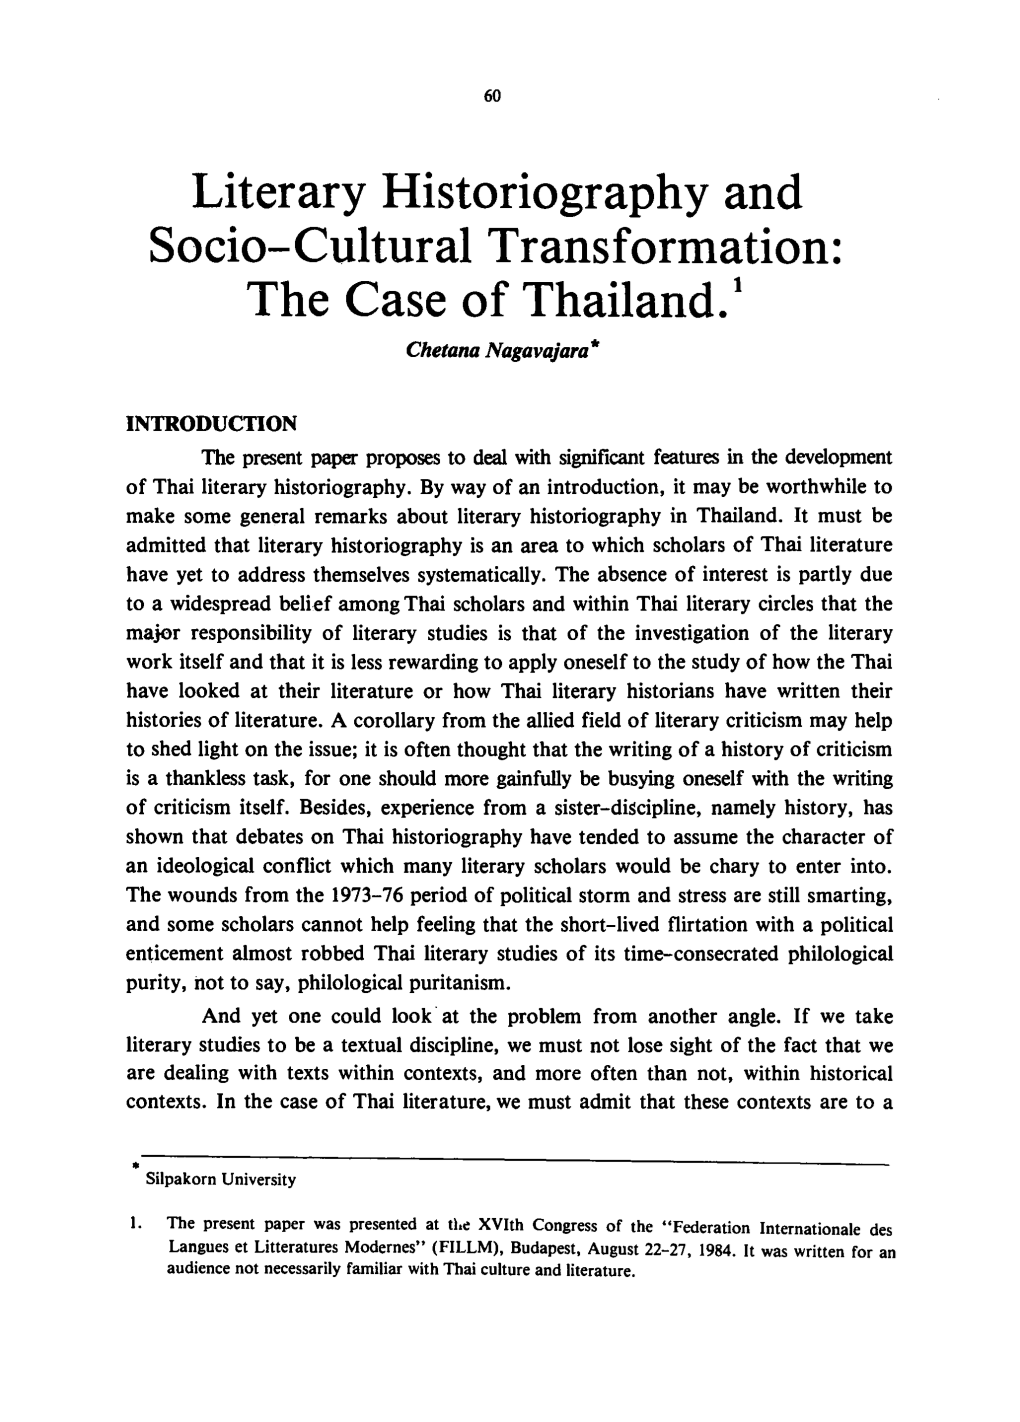 Literary Historiography and Socio-Cultural Transformation: the Case of Thailand